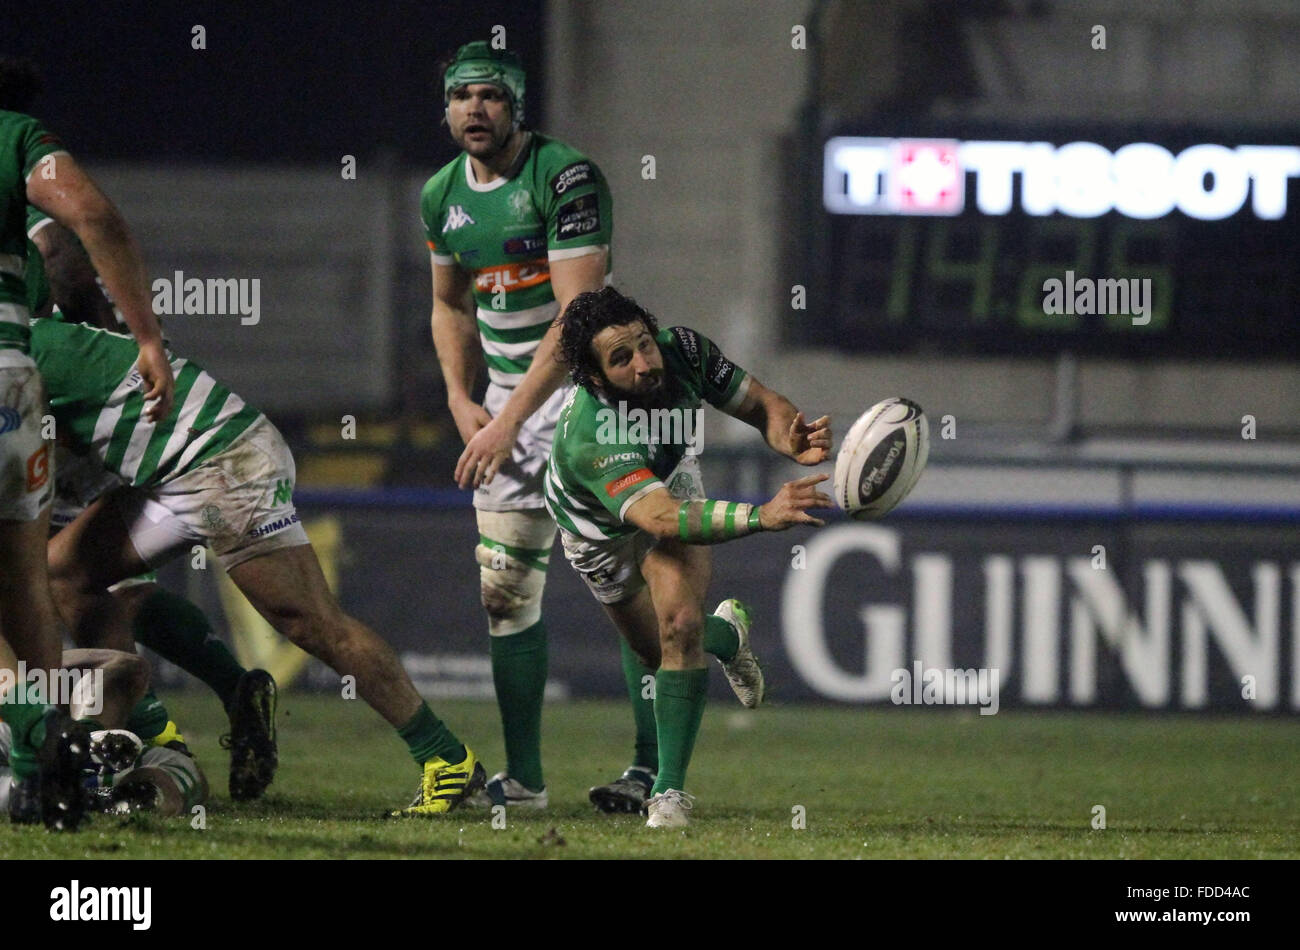 Treviso, Italy. 30th Jan, 2016. Treviso's player Alberto Lucchese passes the ball during Rugby Guinness Pro12 match between Benetton Treviso and Ulster. Credit:  Andrea Spinelli/Pacific Press/Alamy Live News Stock Photo